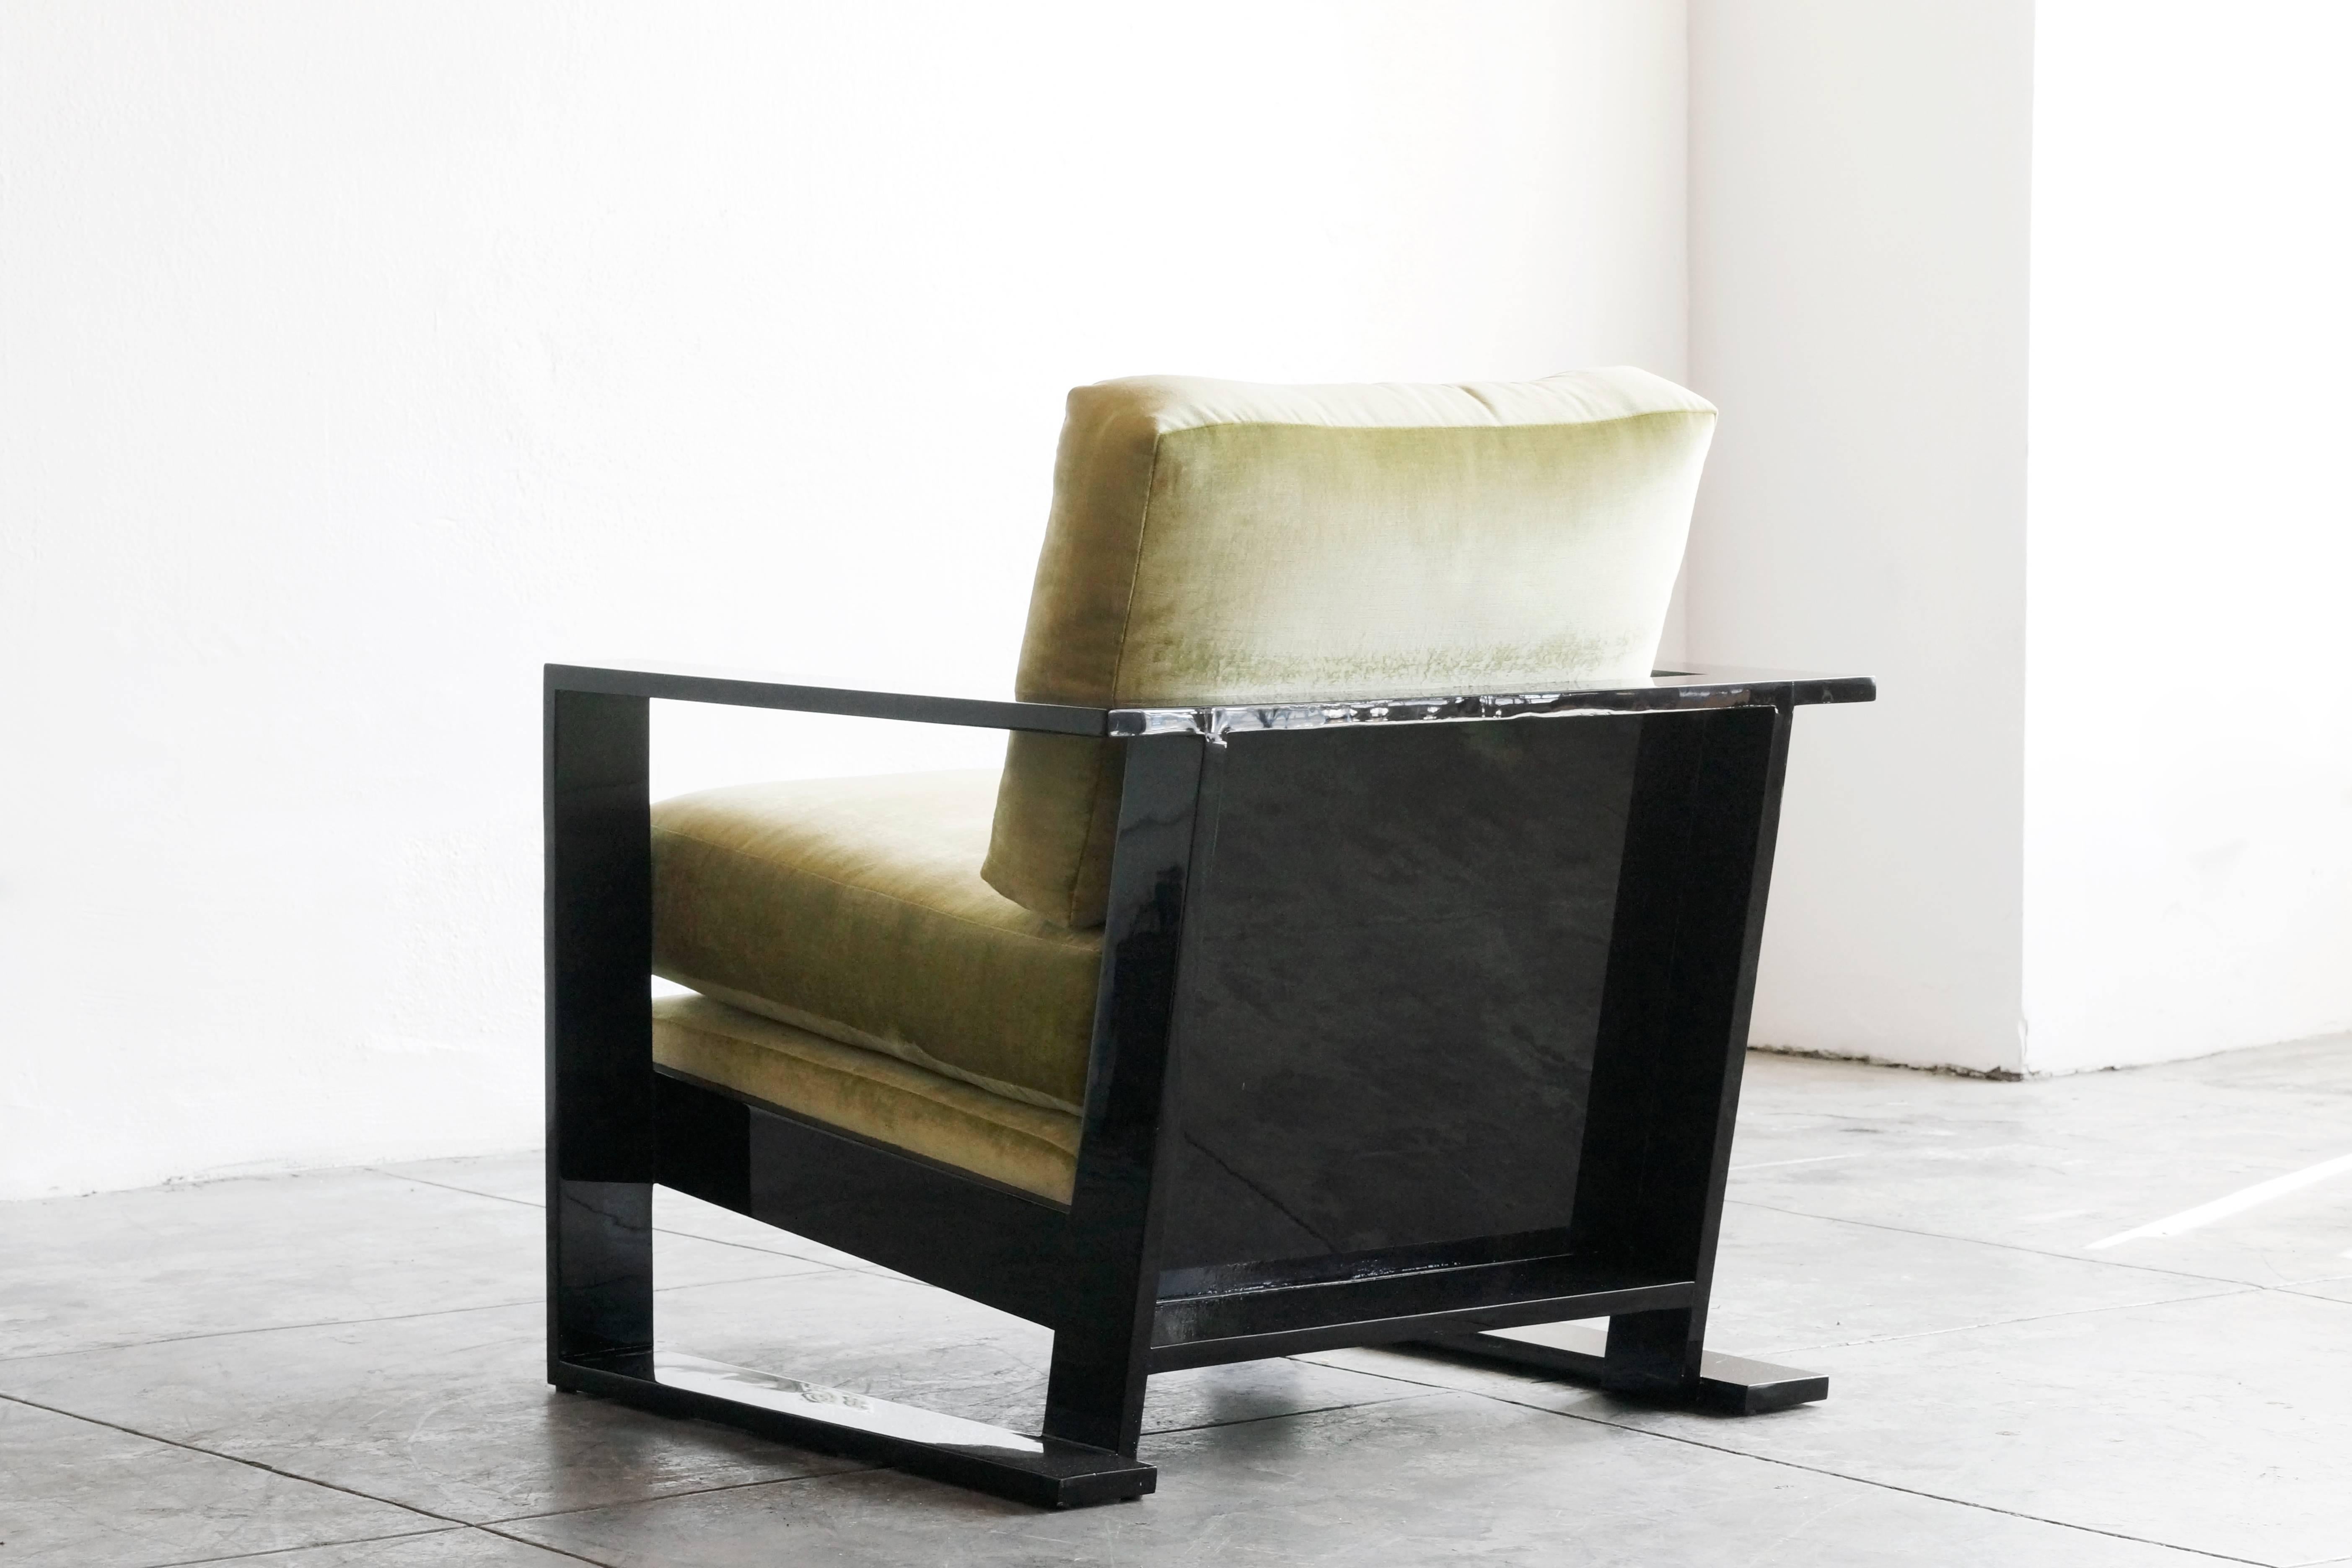 Lacquered wood  armchair in the style of Jean Royere. Fully restored frame and reupholstered seat in velvet. This sleek vintage modern piece may be a one of a kind! Rich lacquer finish is sure to brighten any room.

Dimensions: 30" D x